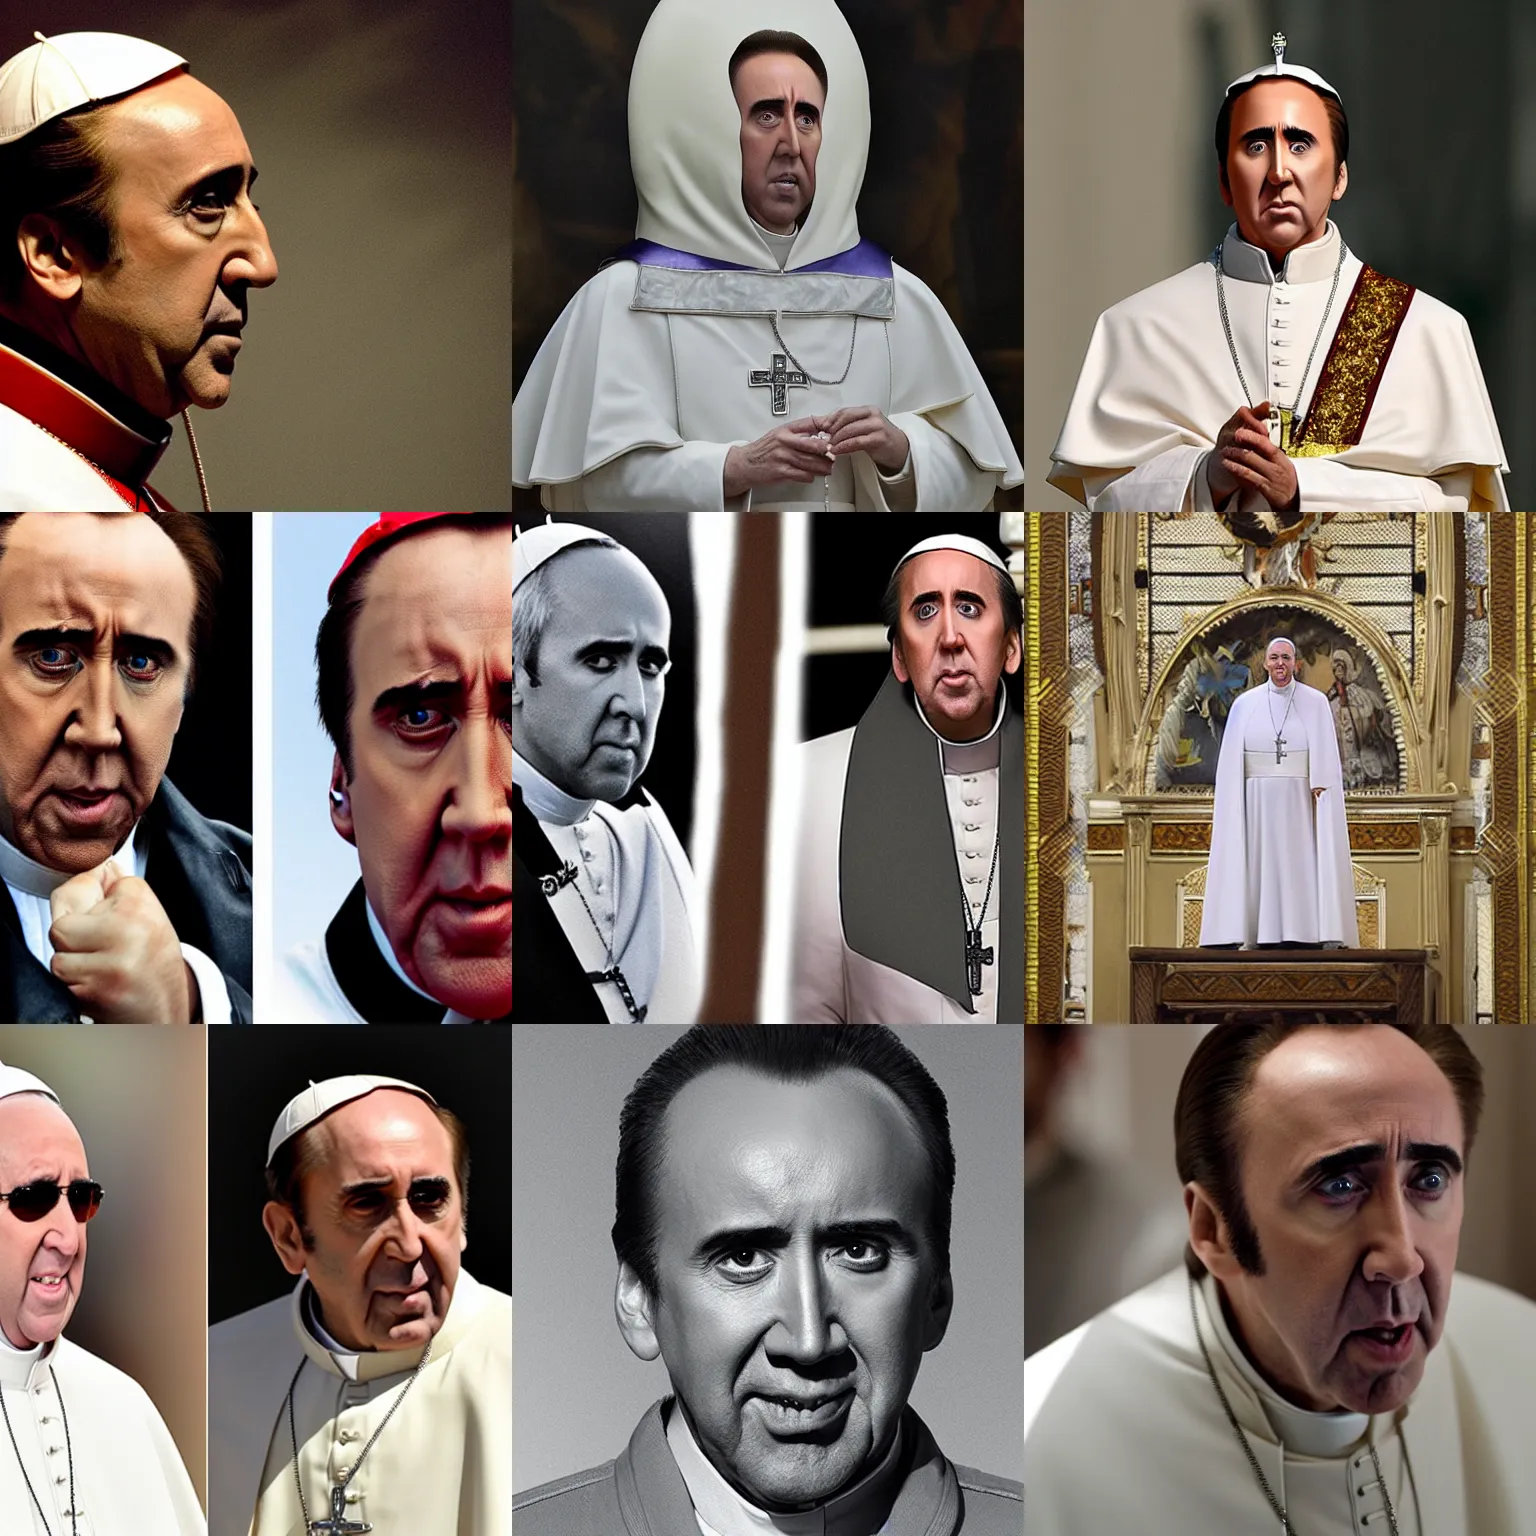 Prompt: Nicolas Cage as the Pope, secretly an extraterrestrial alien, photograph